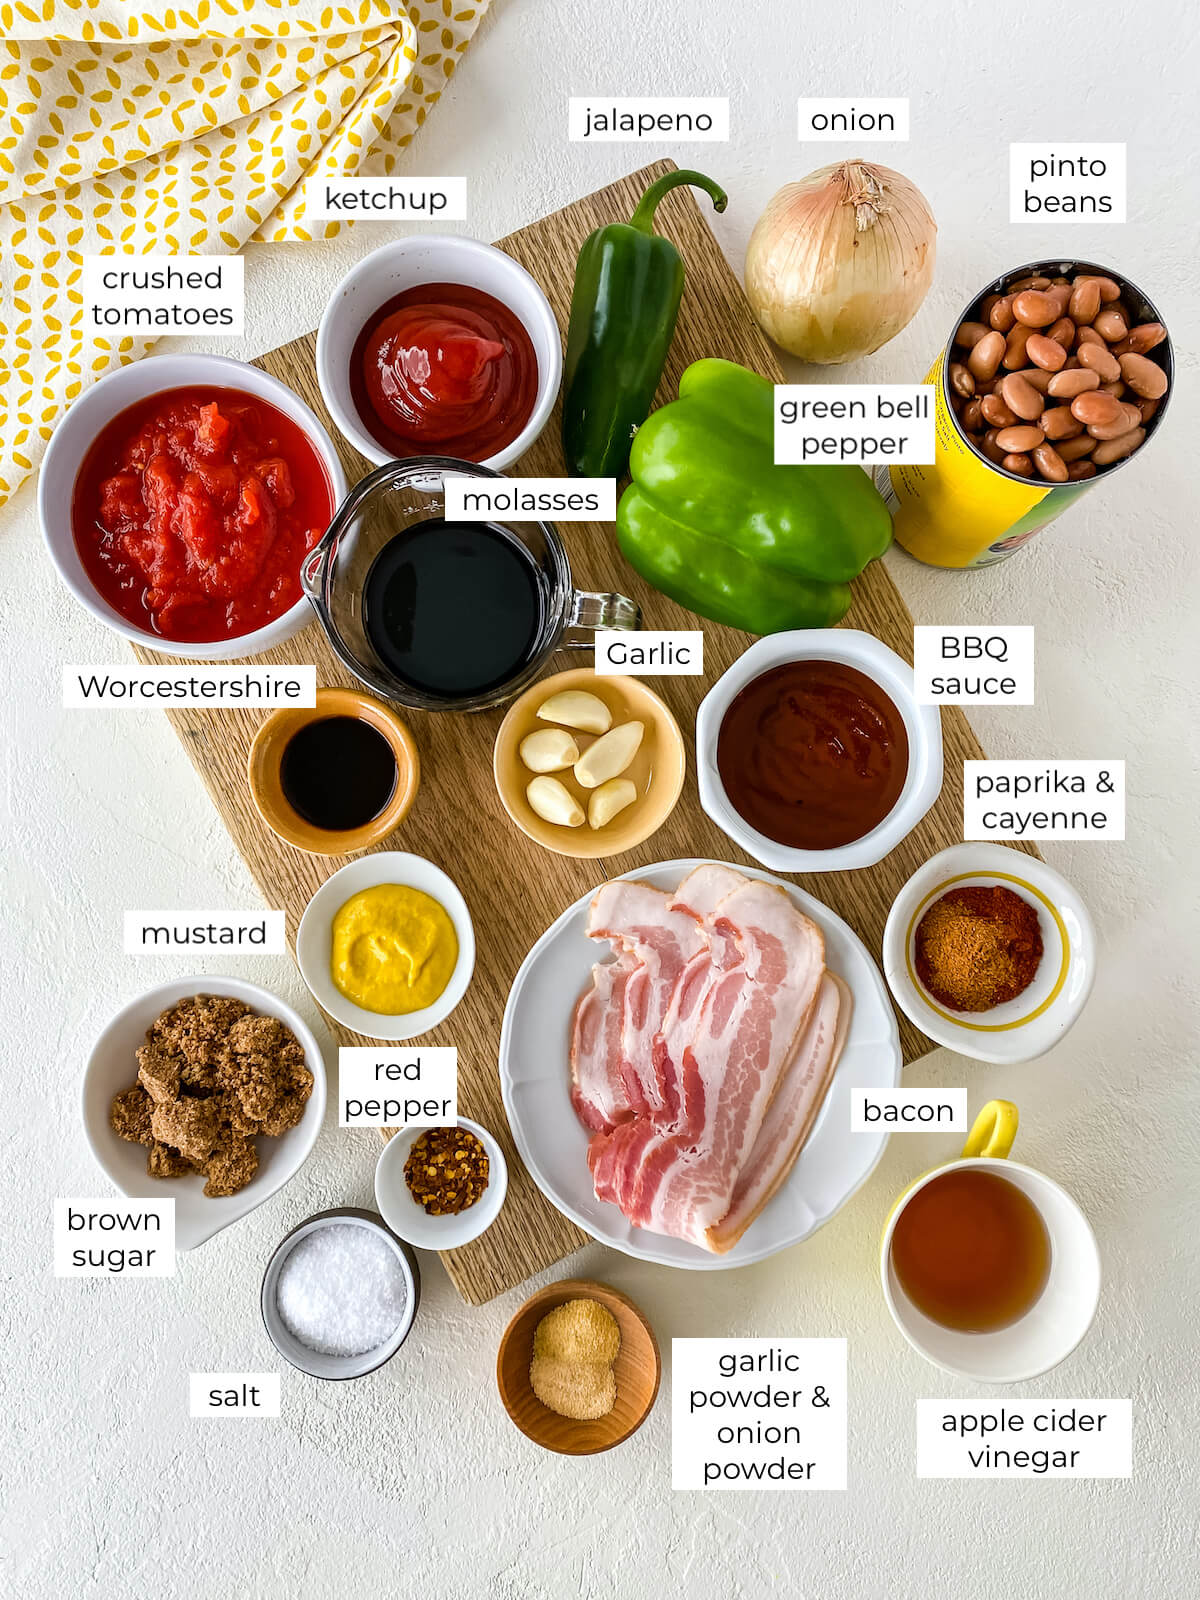 BBQ baked beans ingredients on a cutting board